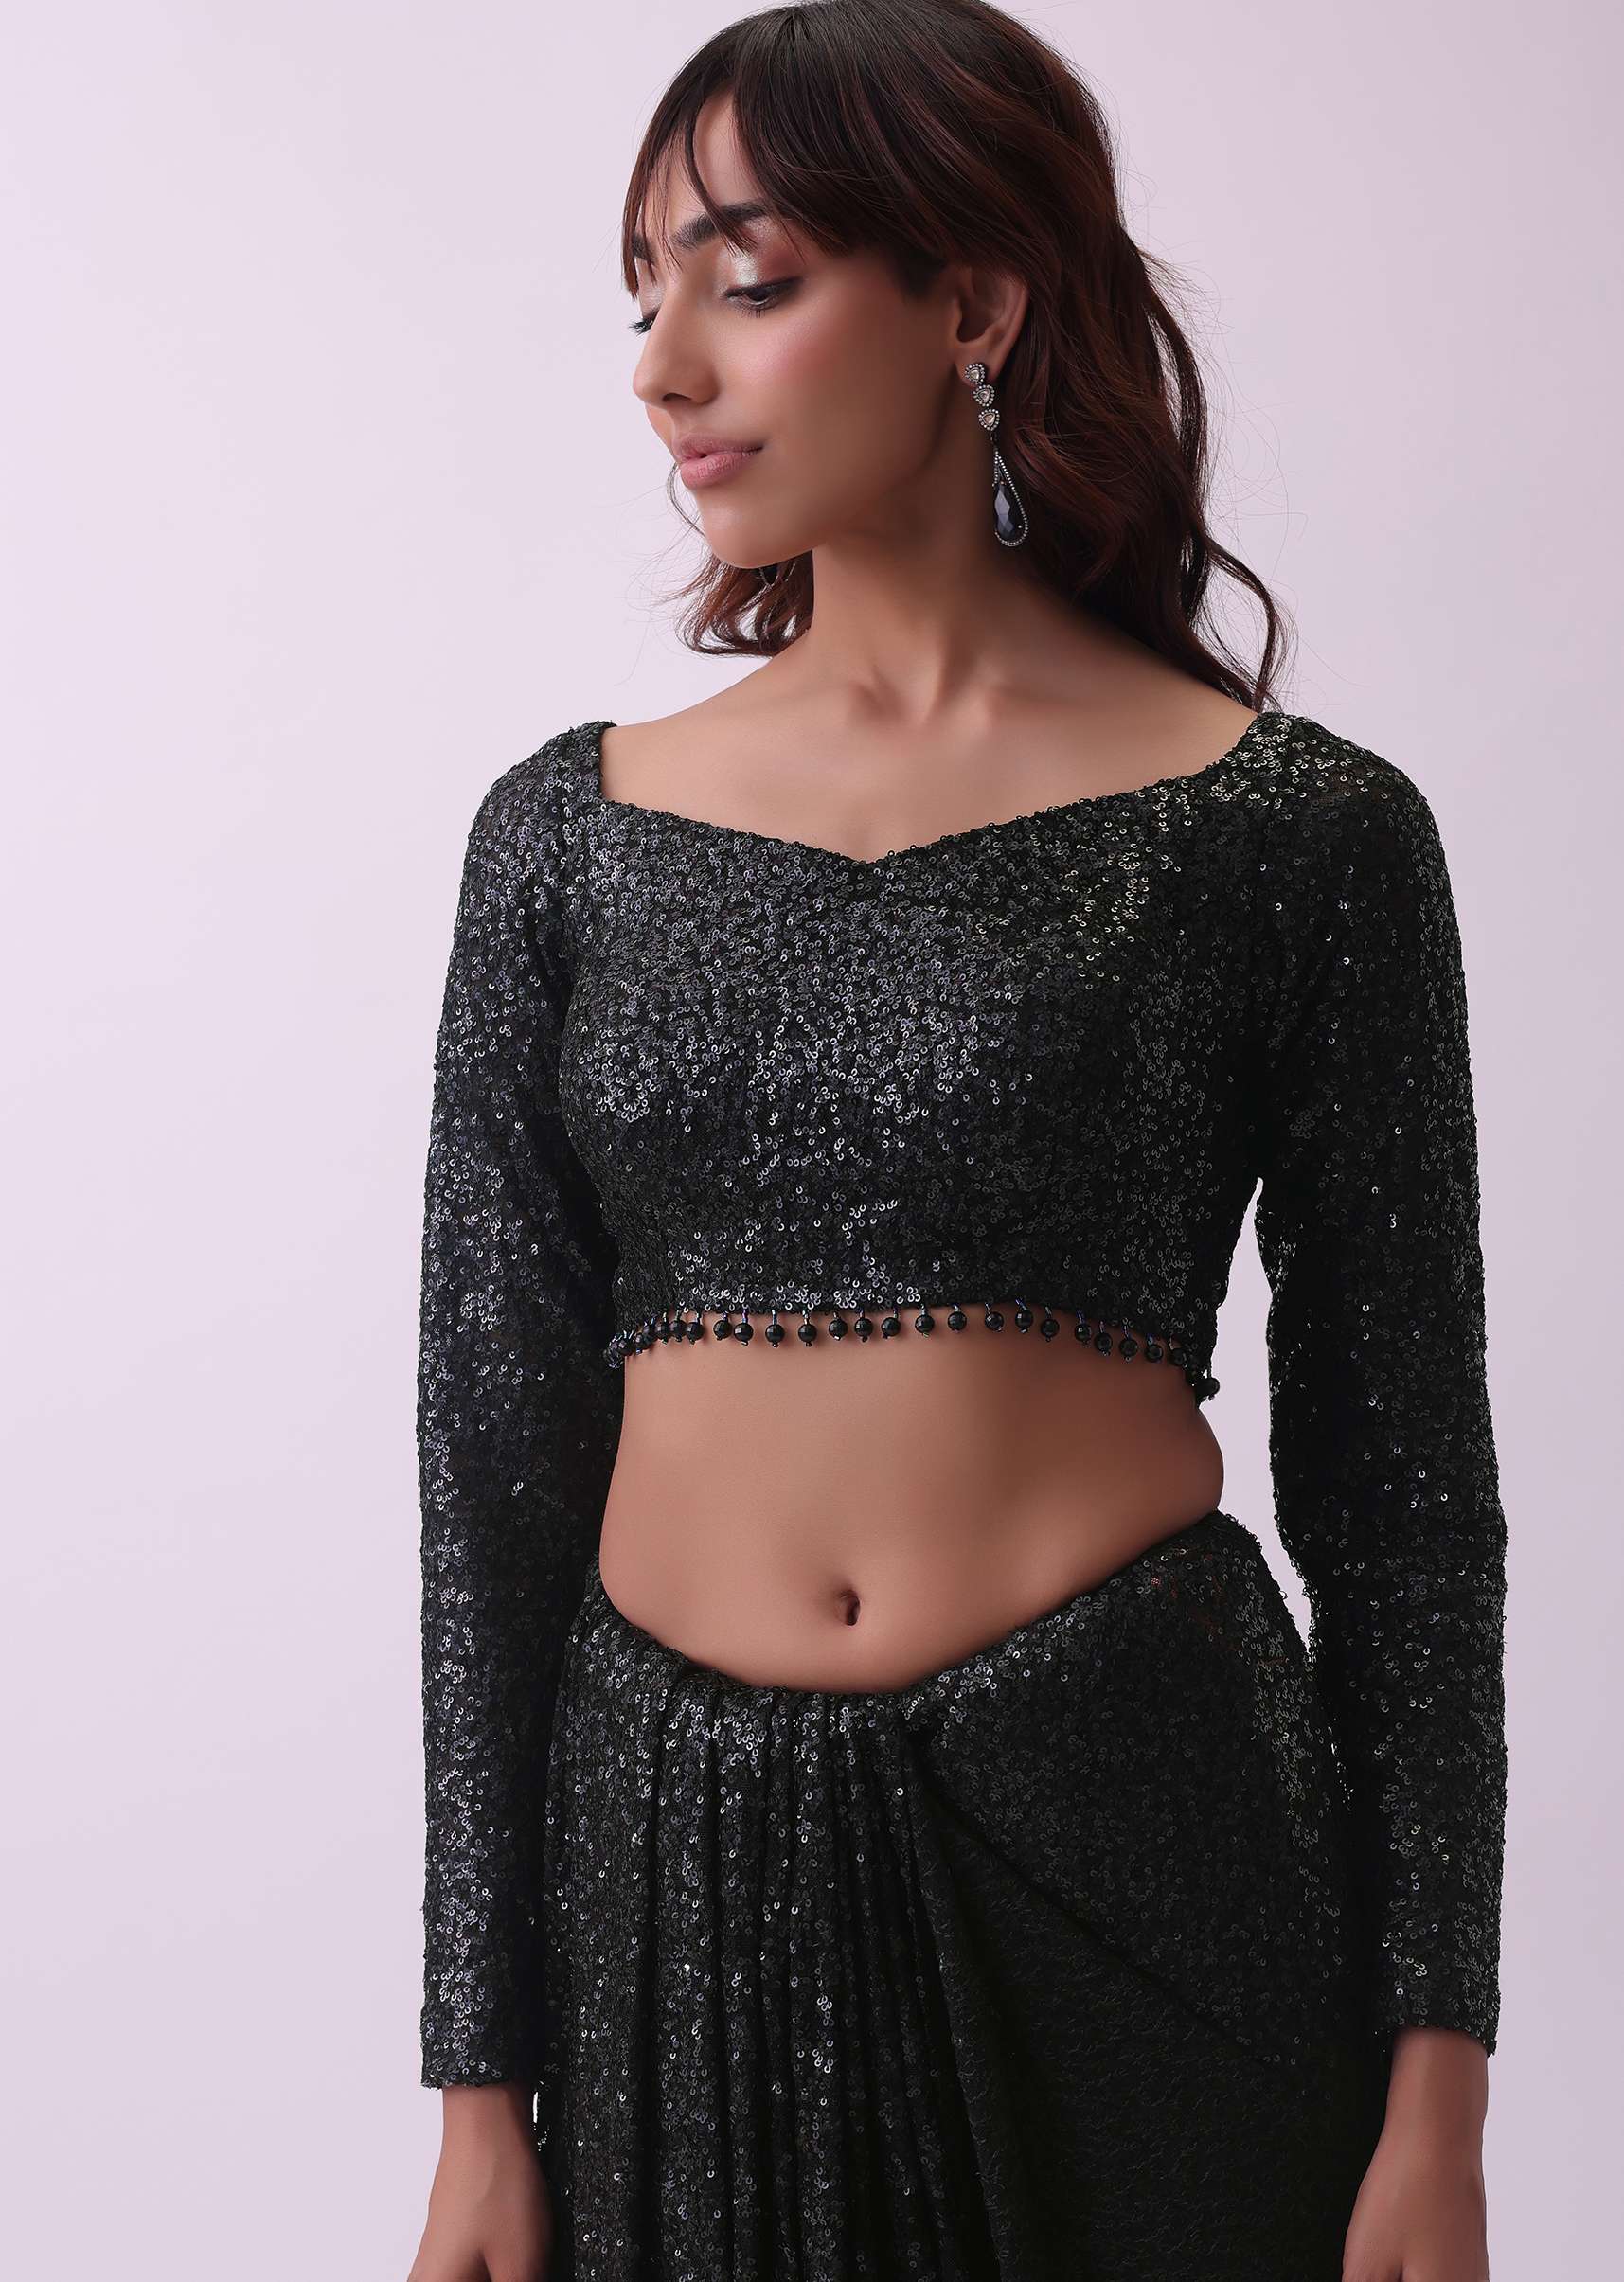 Black Sequins Saree And Blouse With Crystal Detailing